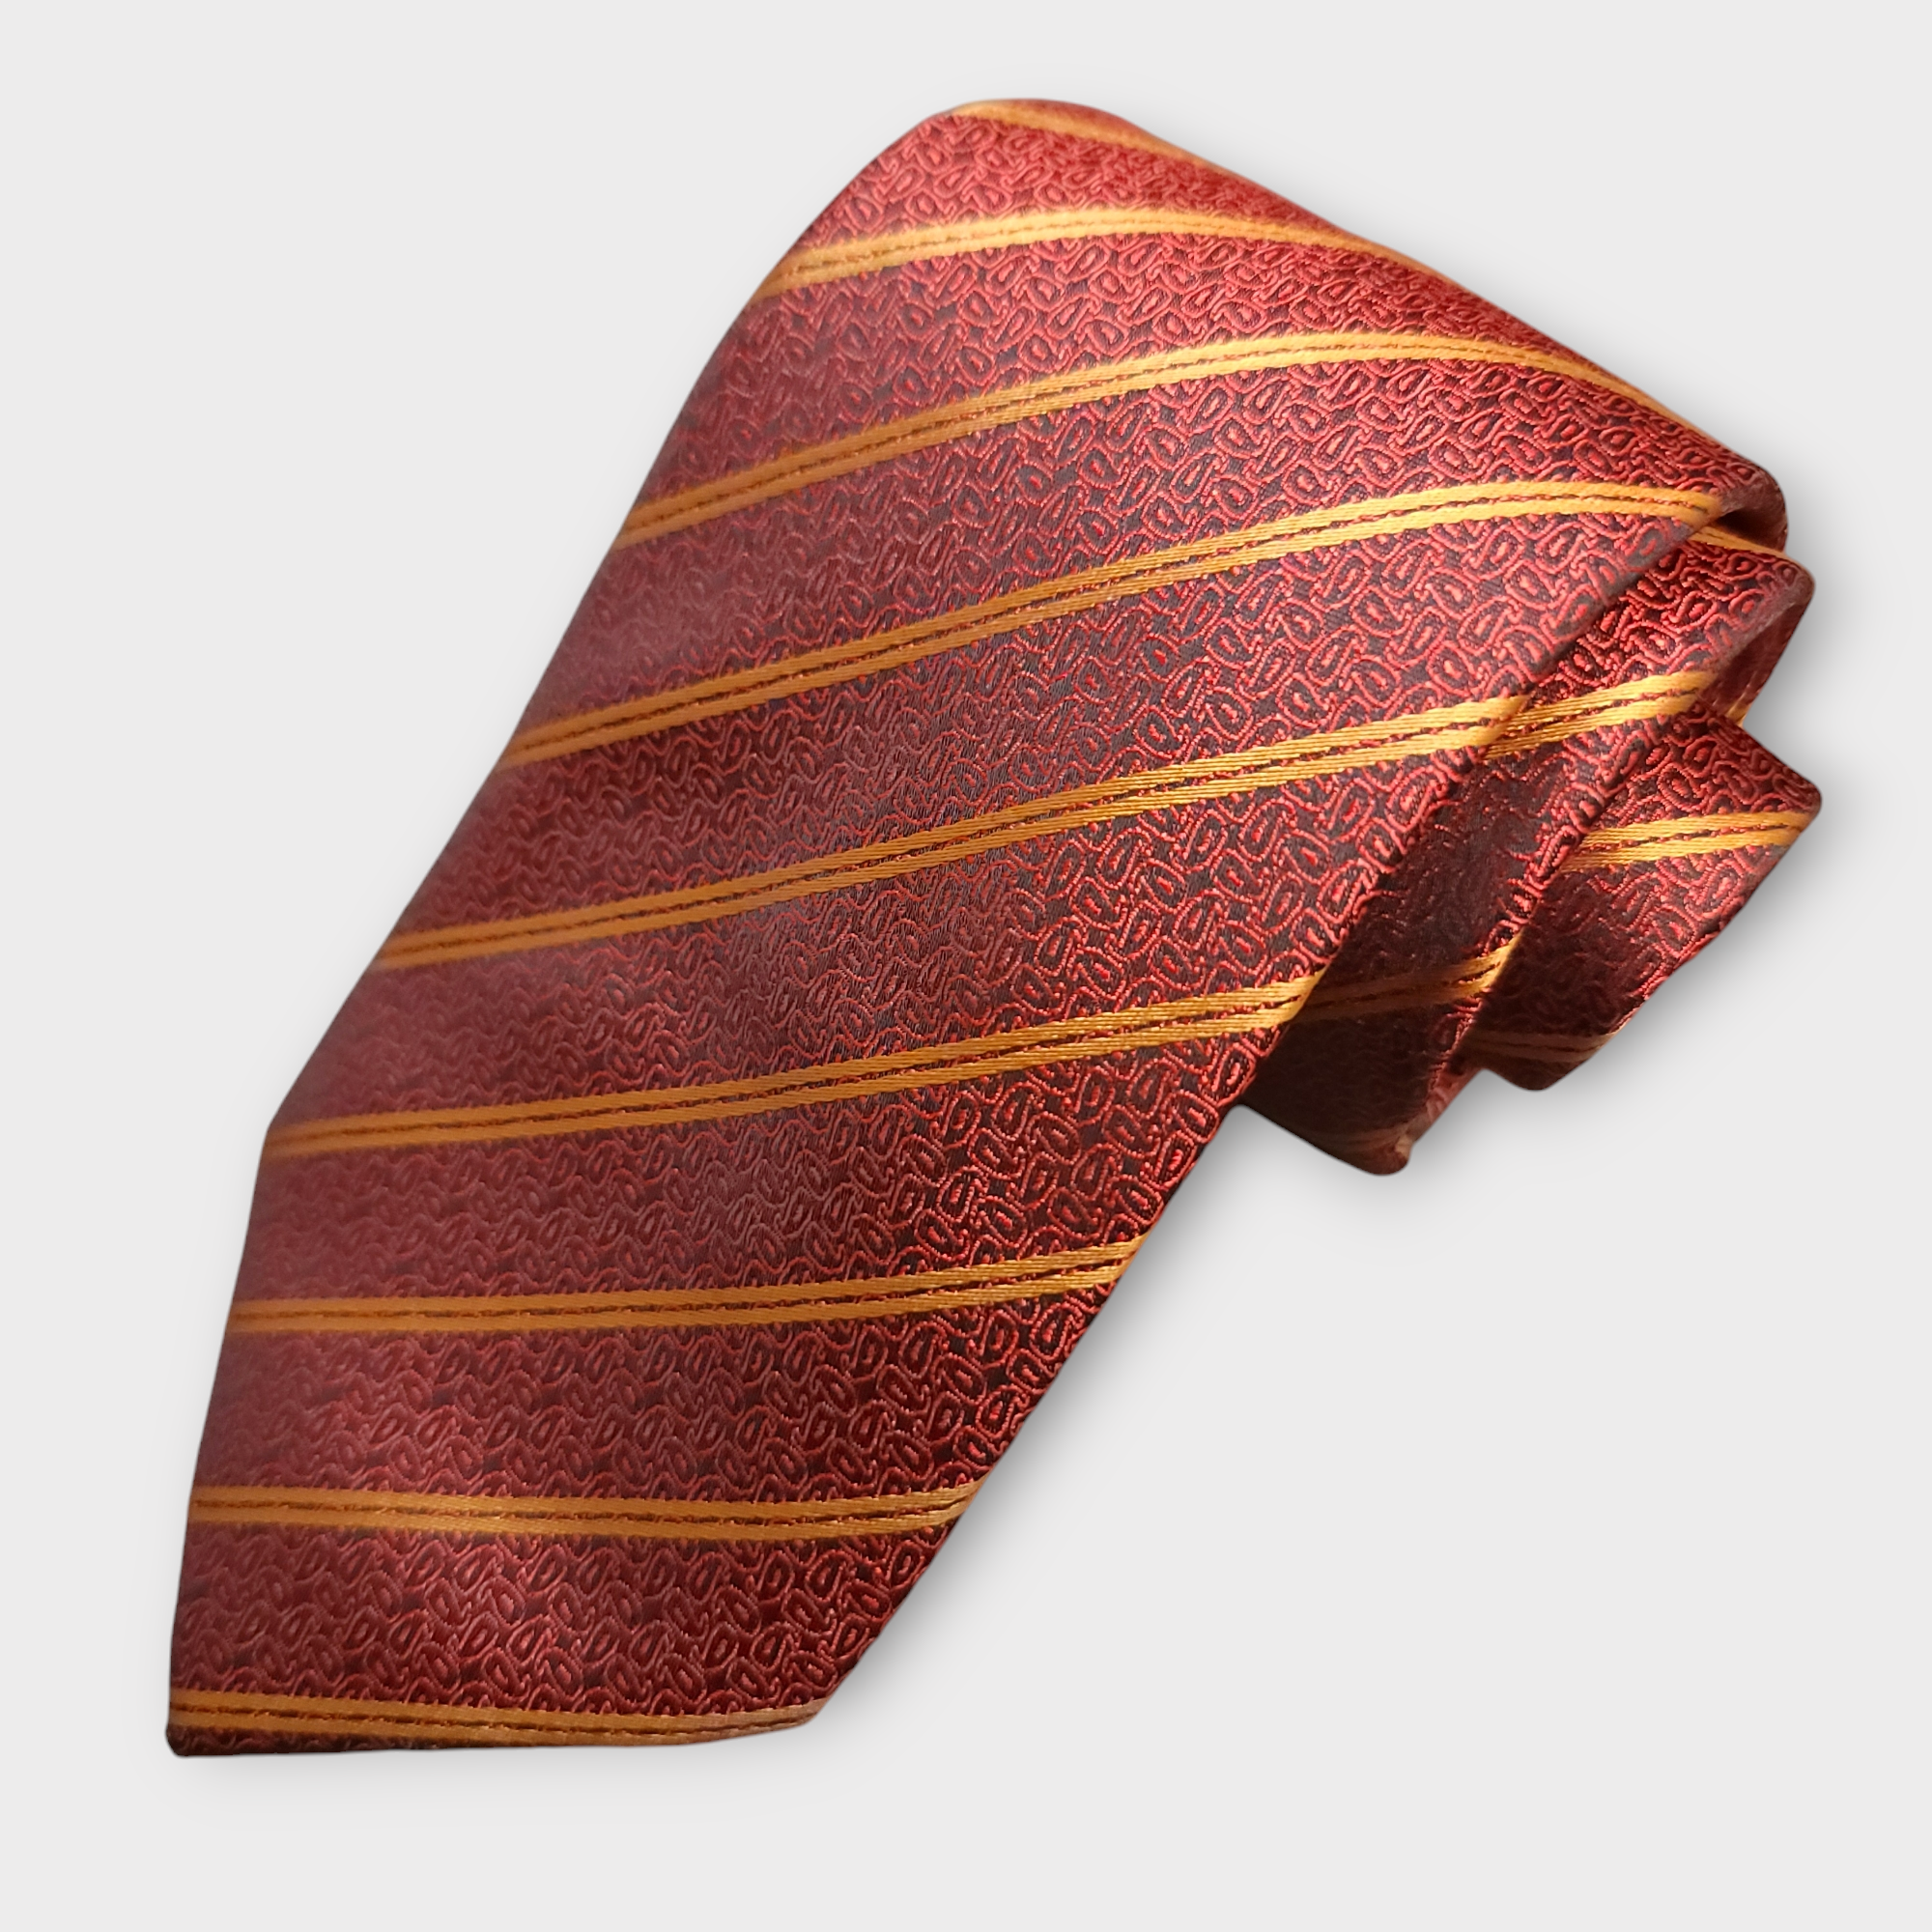 Red Gold Striped Silk Tie Set of Pocket Square and Cufflinks